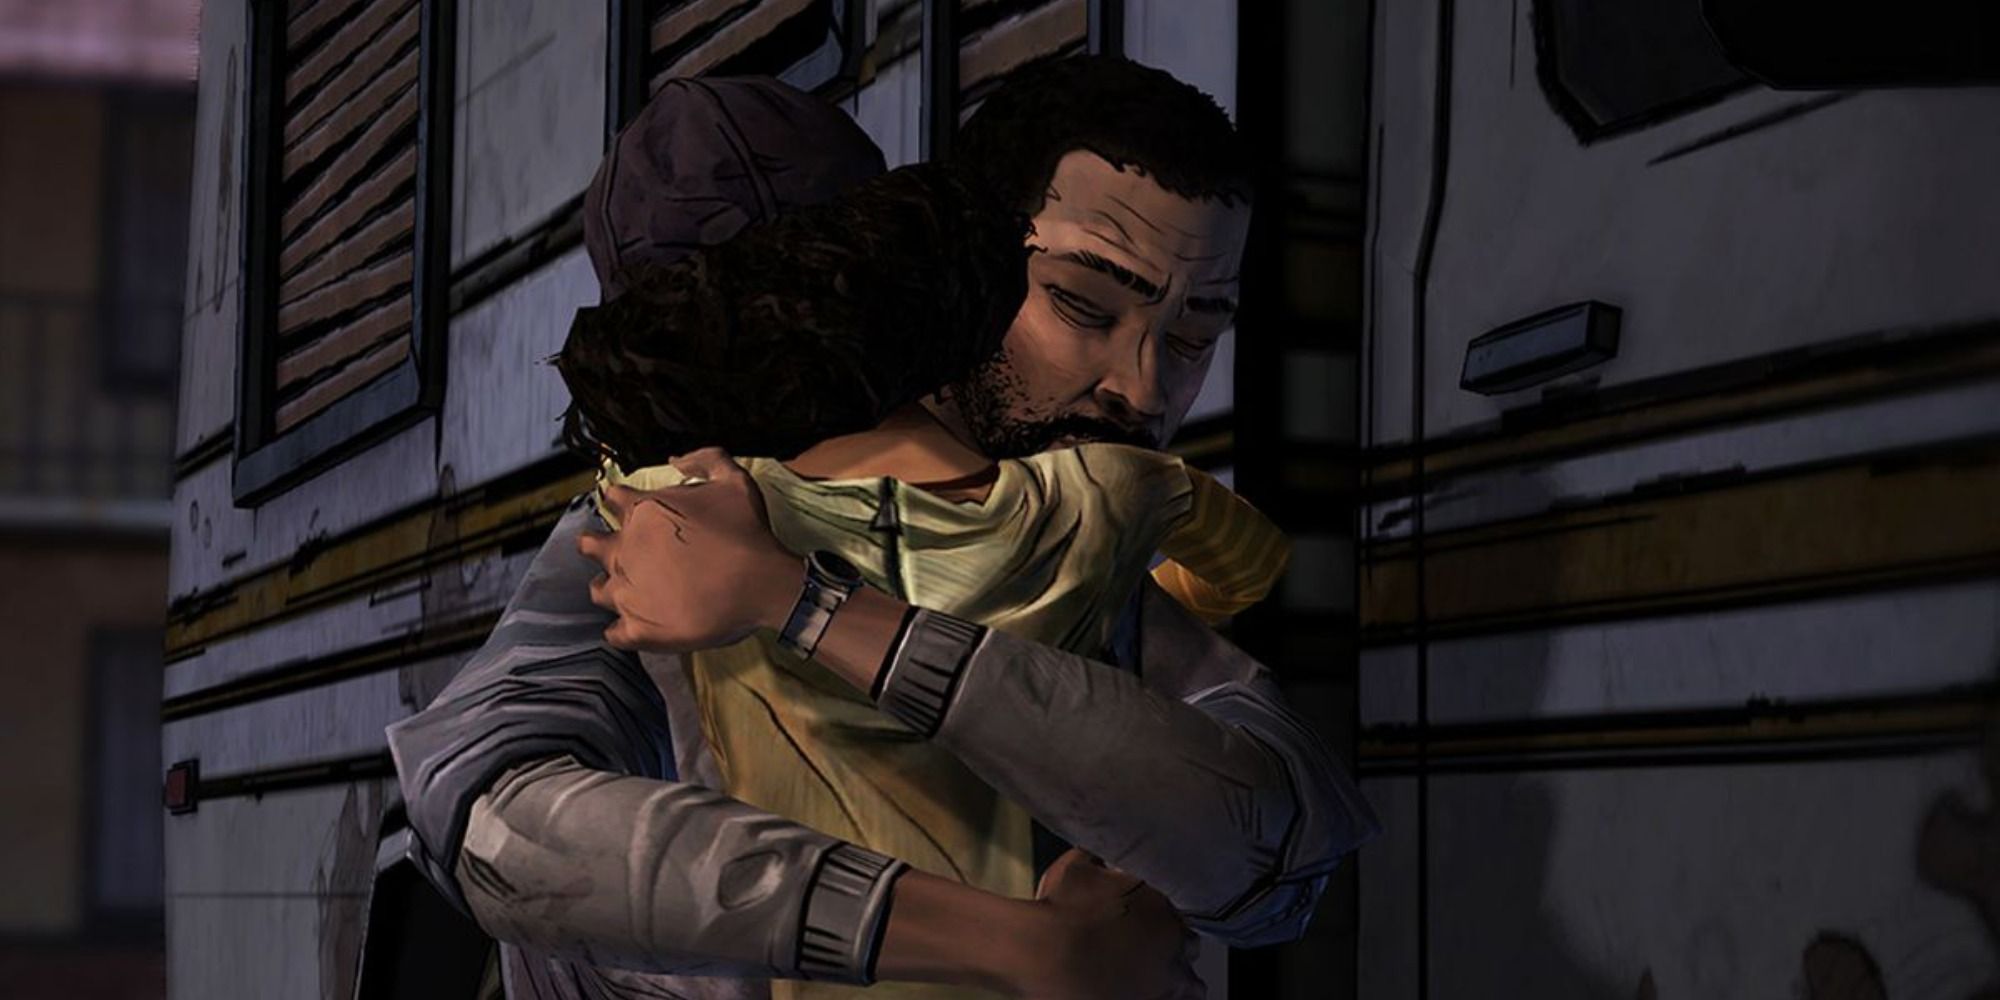 Lee & Clementine hugging in front of an RV